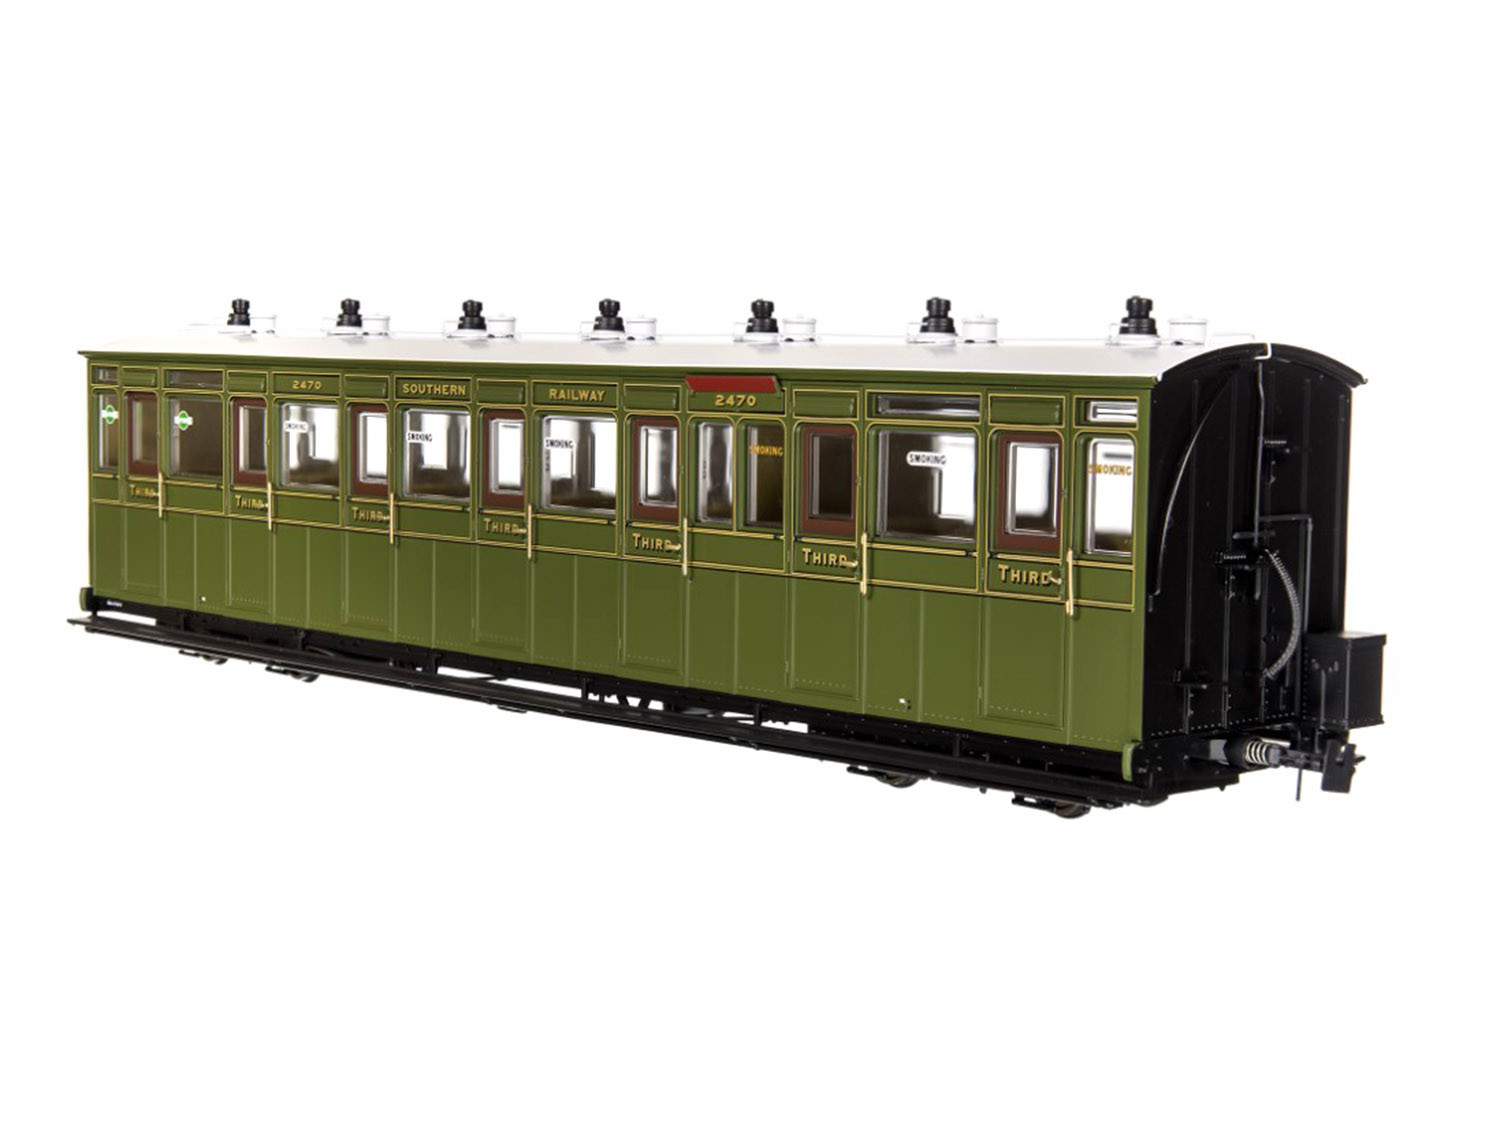 Southern All 3rd Coach 2470 1924-1935 (DCC-Fitted)